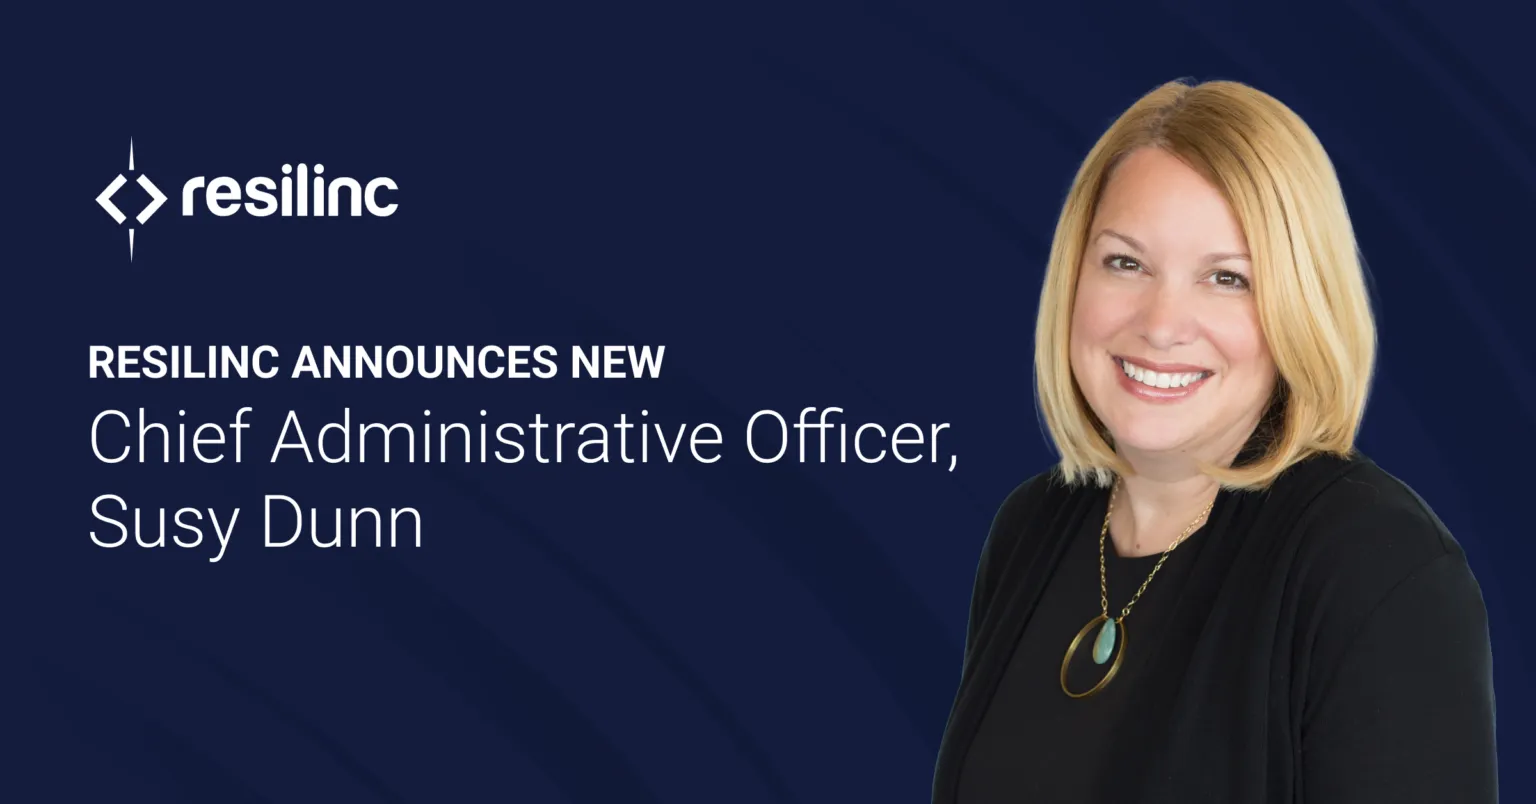 Resilinc Announces New Chief Administrative Officer